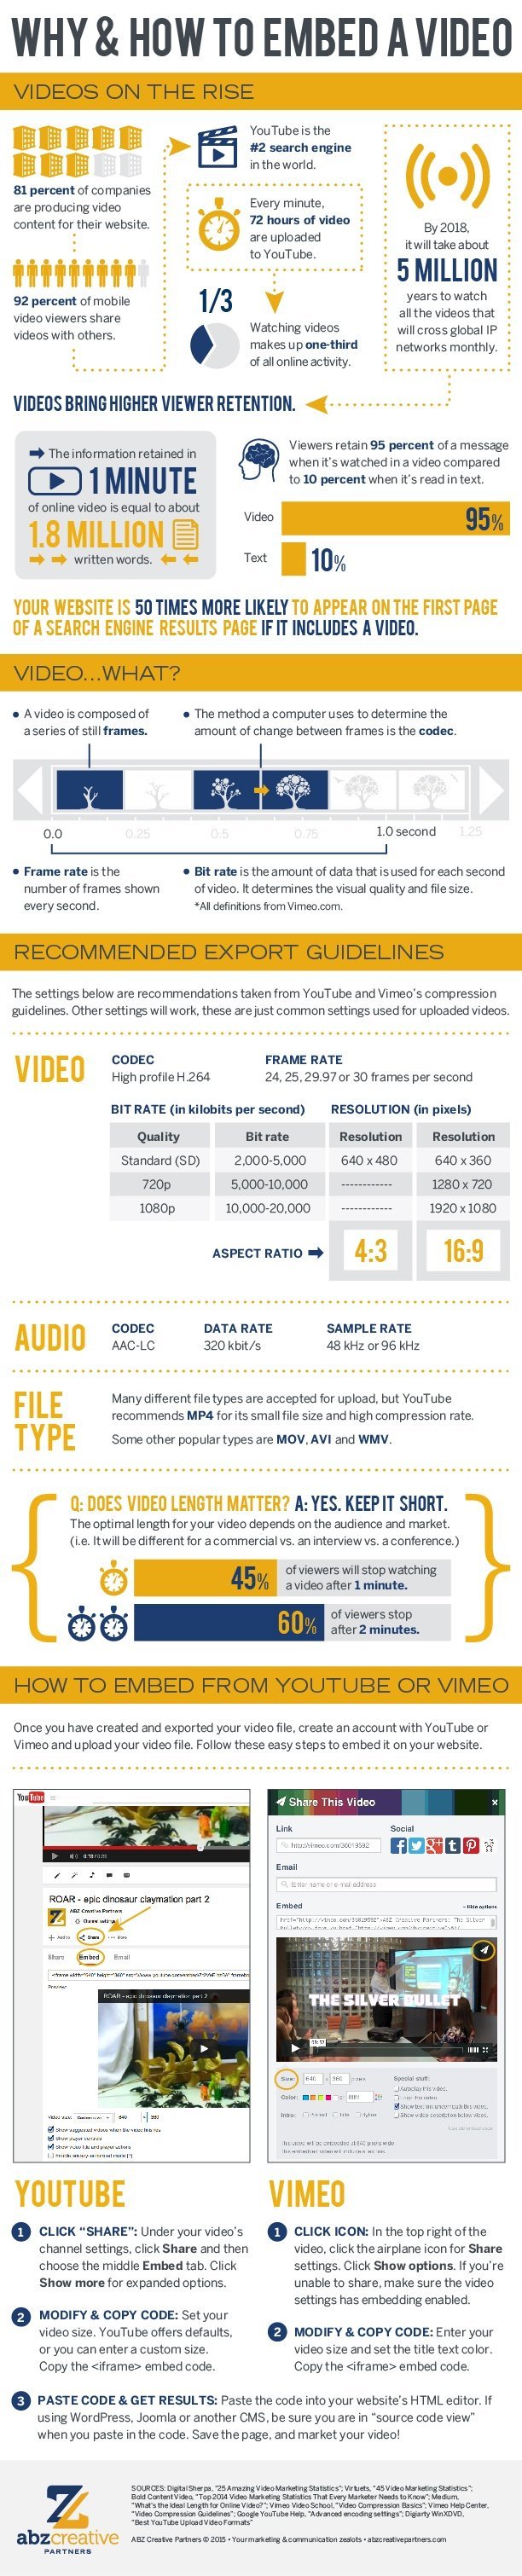 Why and How to Embed a Video [Infographic]